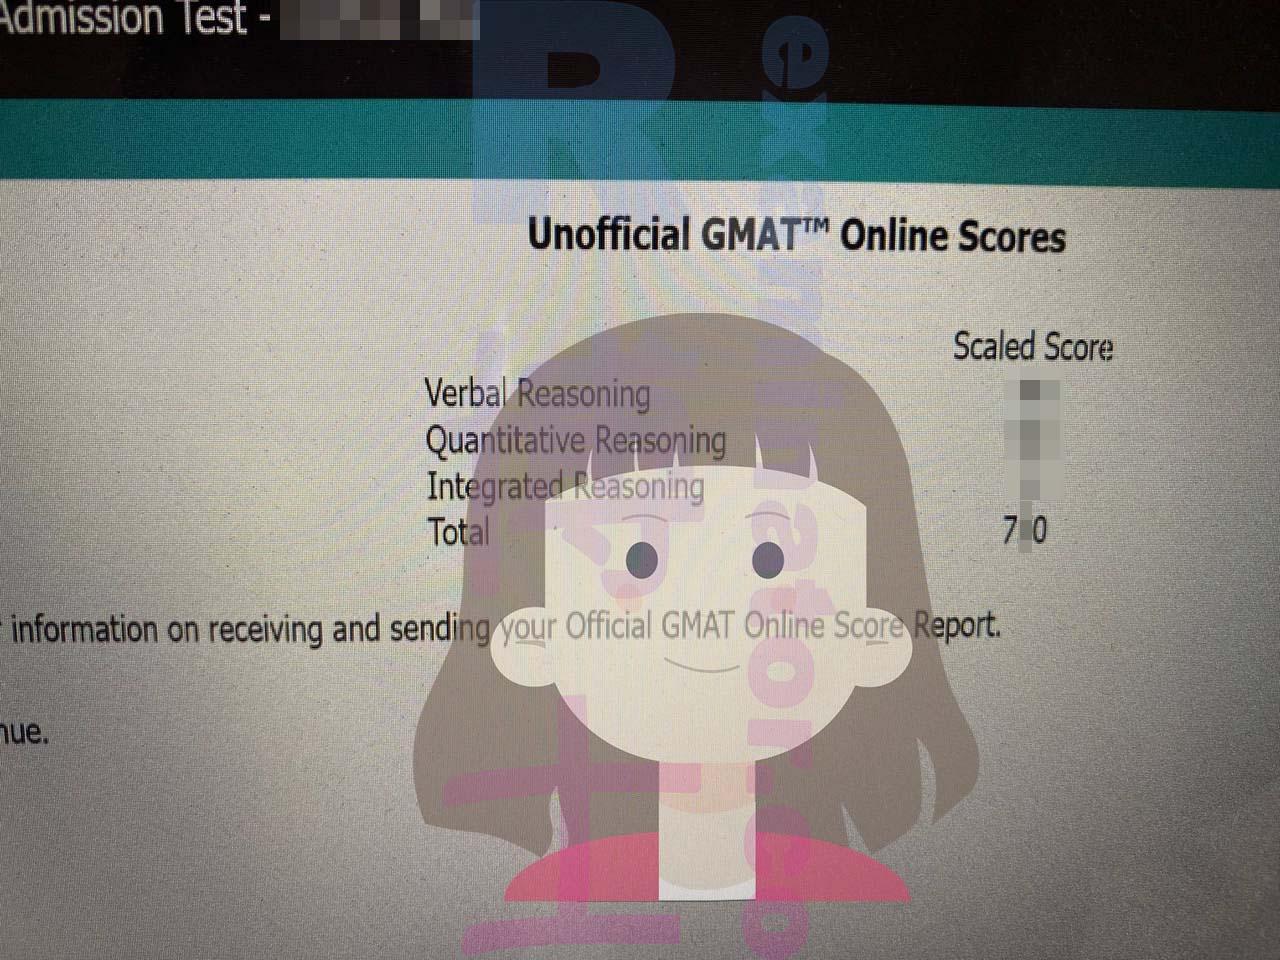 🥇🇺🇸 Daisy's Team: The Proxy Testing Gold Standard - Rescuing American Client from Amateur Agent's Botched GRE Attempt and Ensuring GMAT Success! 🗡️🔥